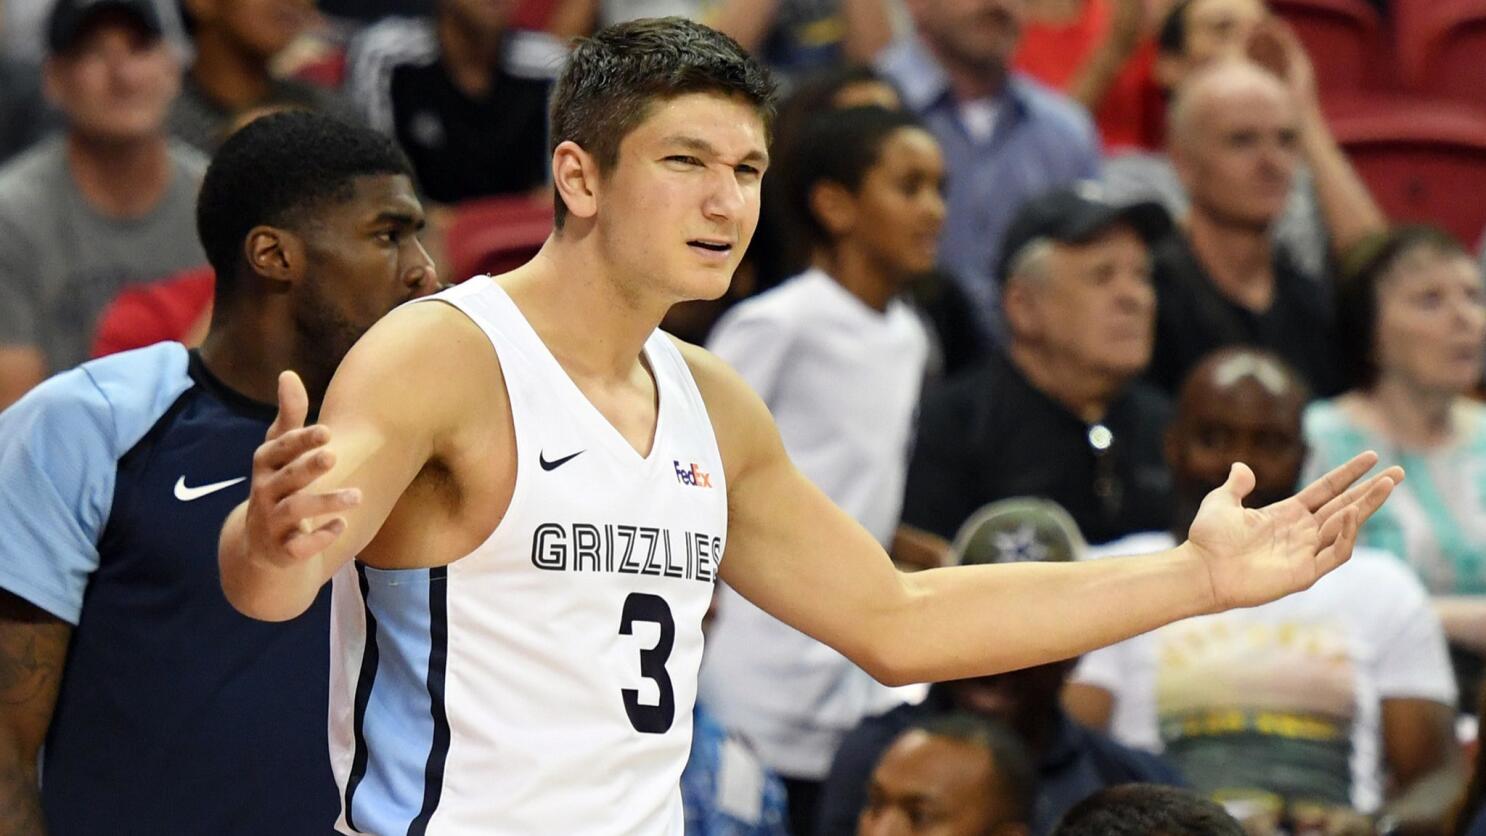 One-game suspension would be enough for Grayson Allen - The Boston Globe